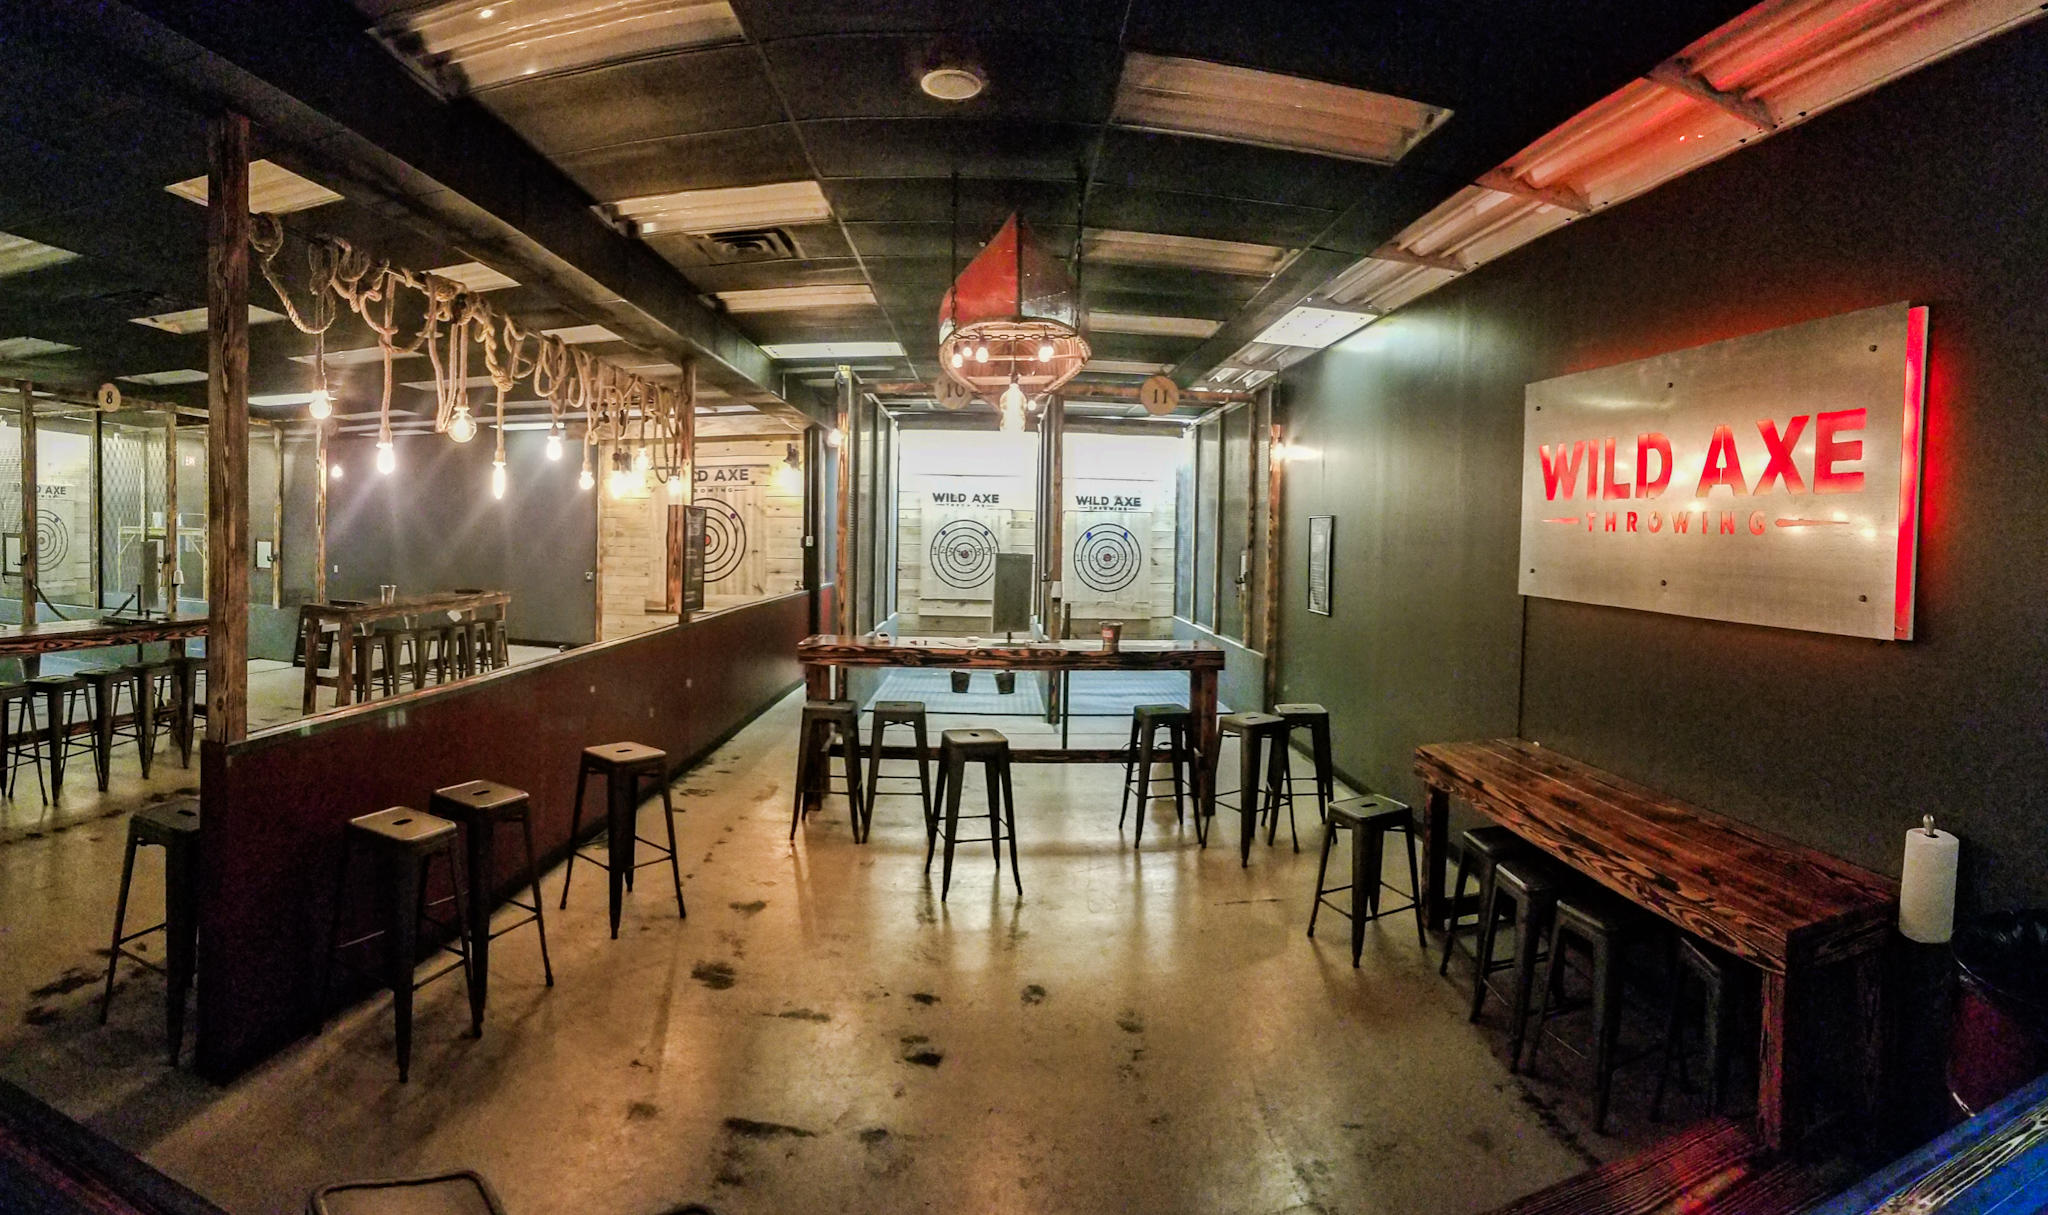 Wild Axe Throwing is the only axe throwing facility in the world that has a party room with dedicated throwing lanes! You are able to bring your own food into our party room. We have a liquor license and a fully stocked bar to make your experience with us perfect!